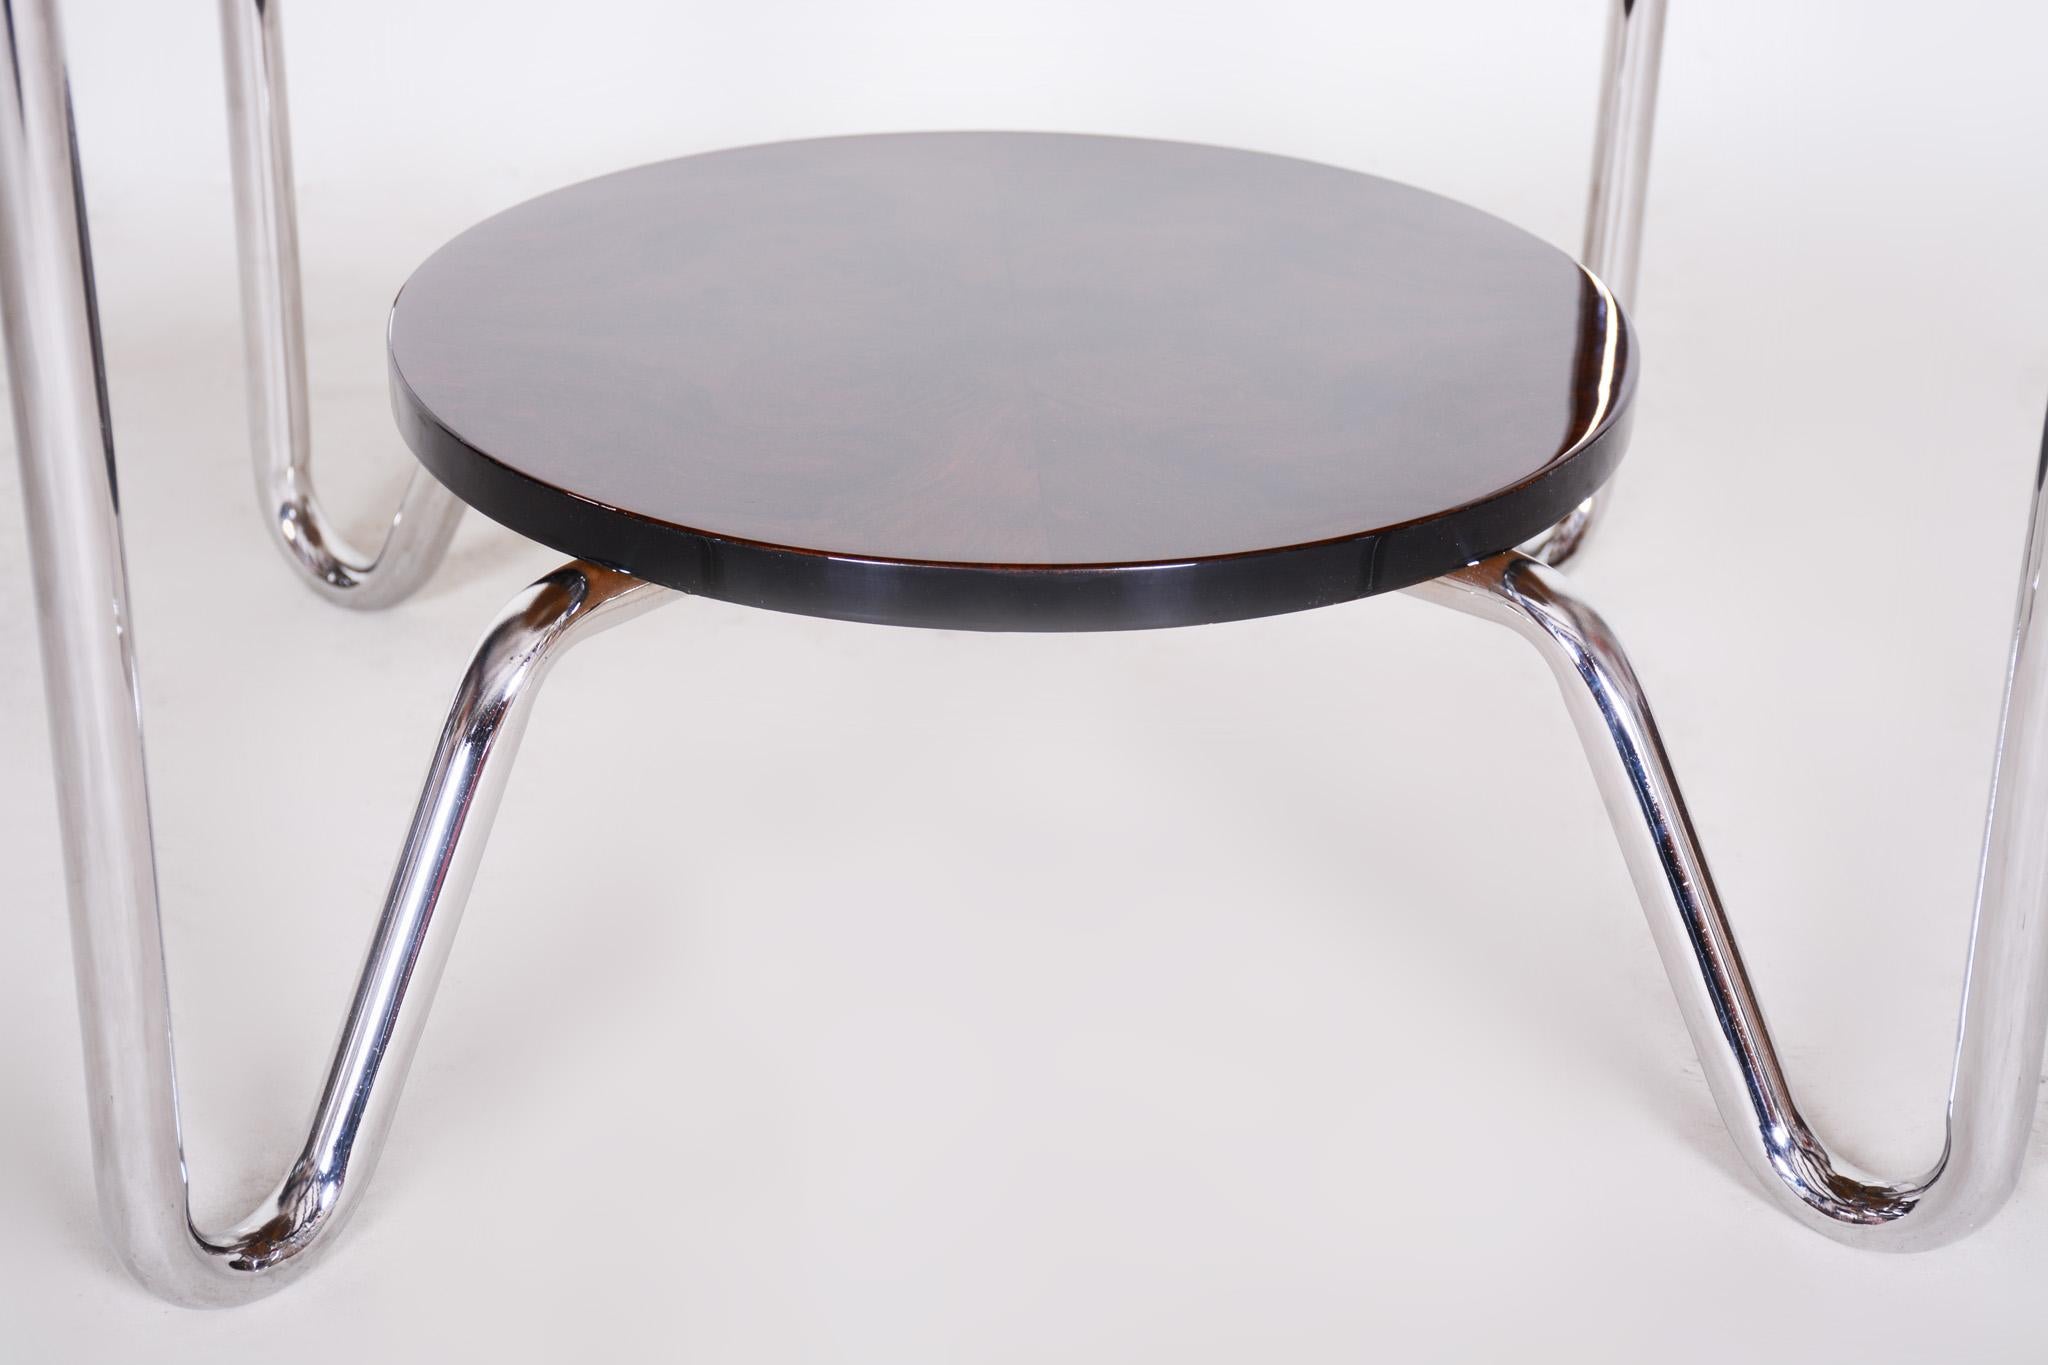 Czech Unique Bauhaus Small Tall Side Table, Chrome and Lacquered Wood, Kovona, 1950s